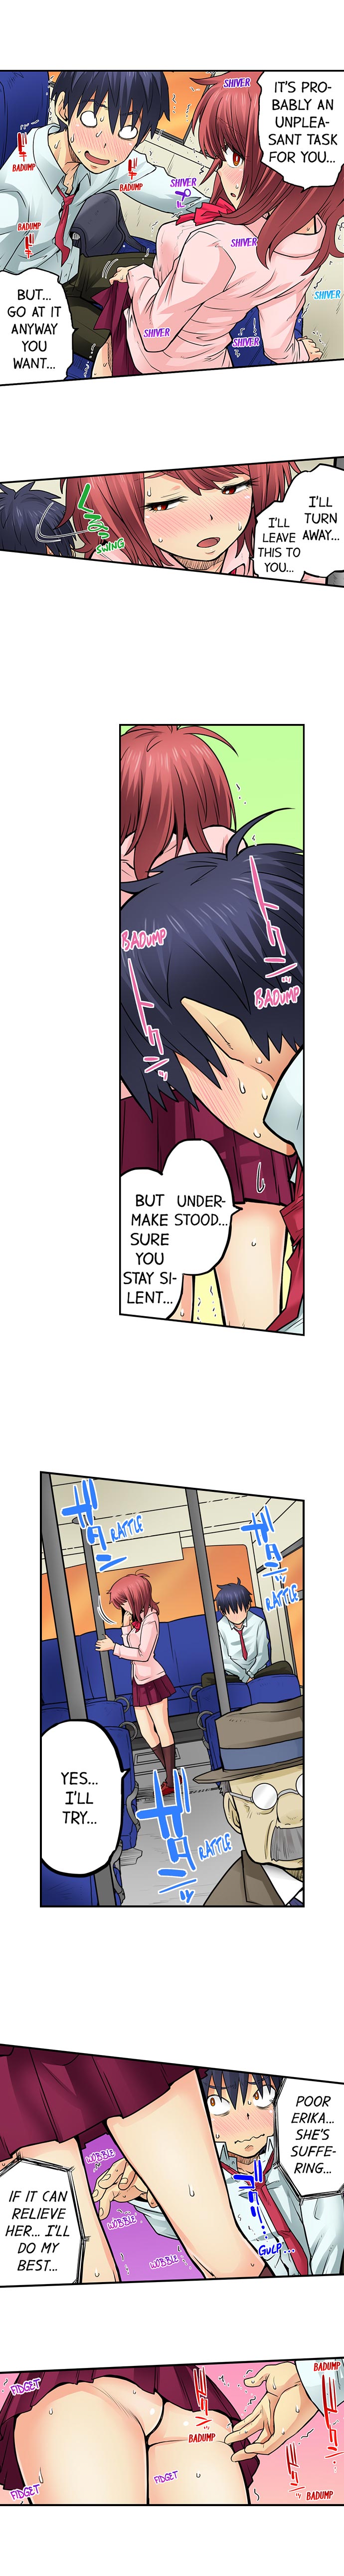 My Classmate is My Dad’s Bride, But in Bed She’s Mine - Chapter 45 Page 5